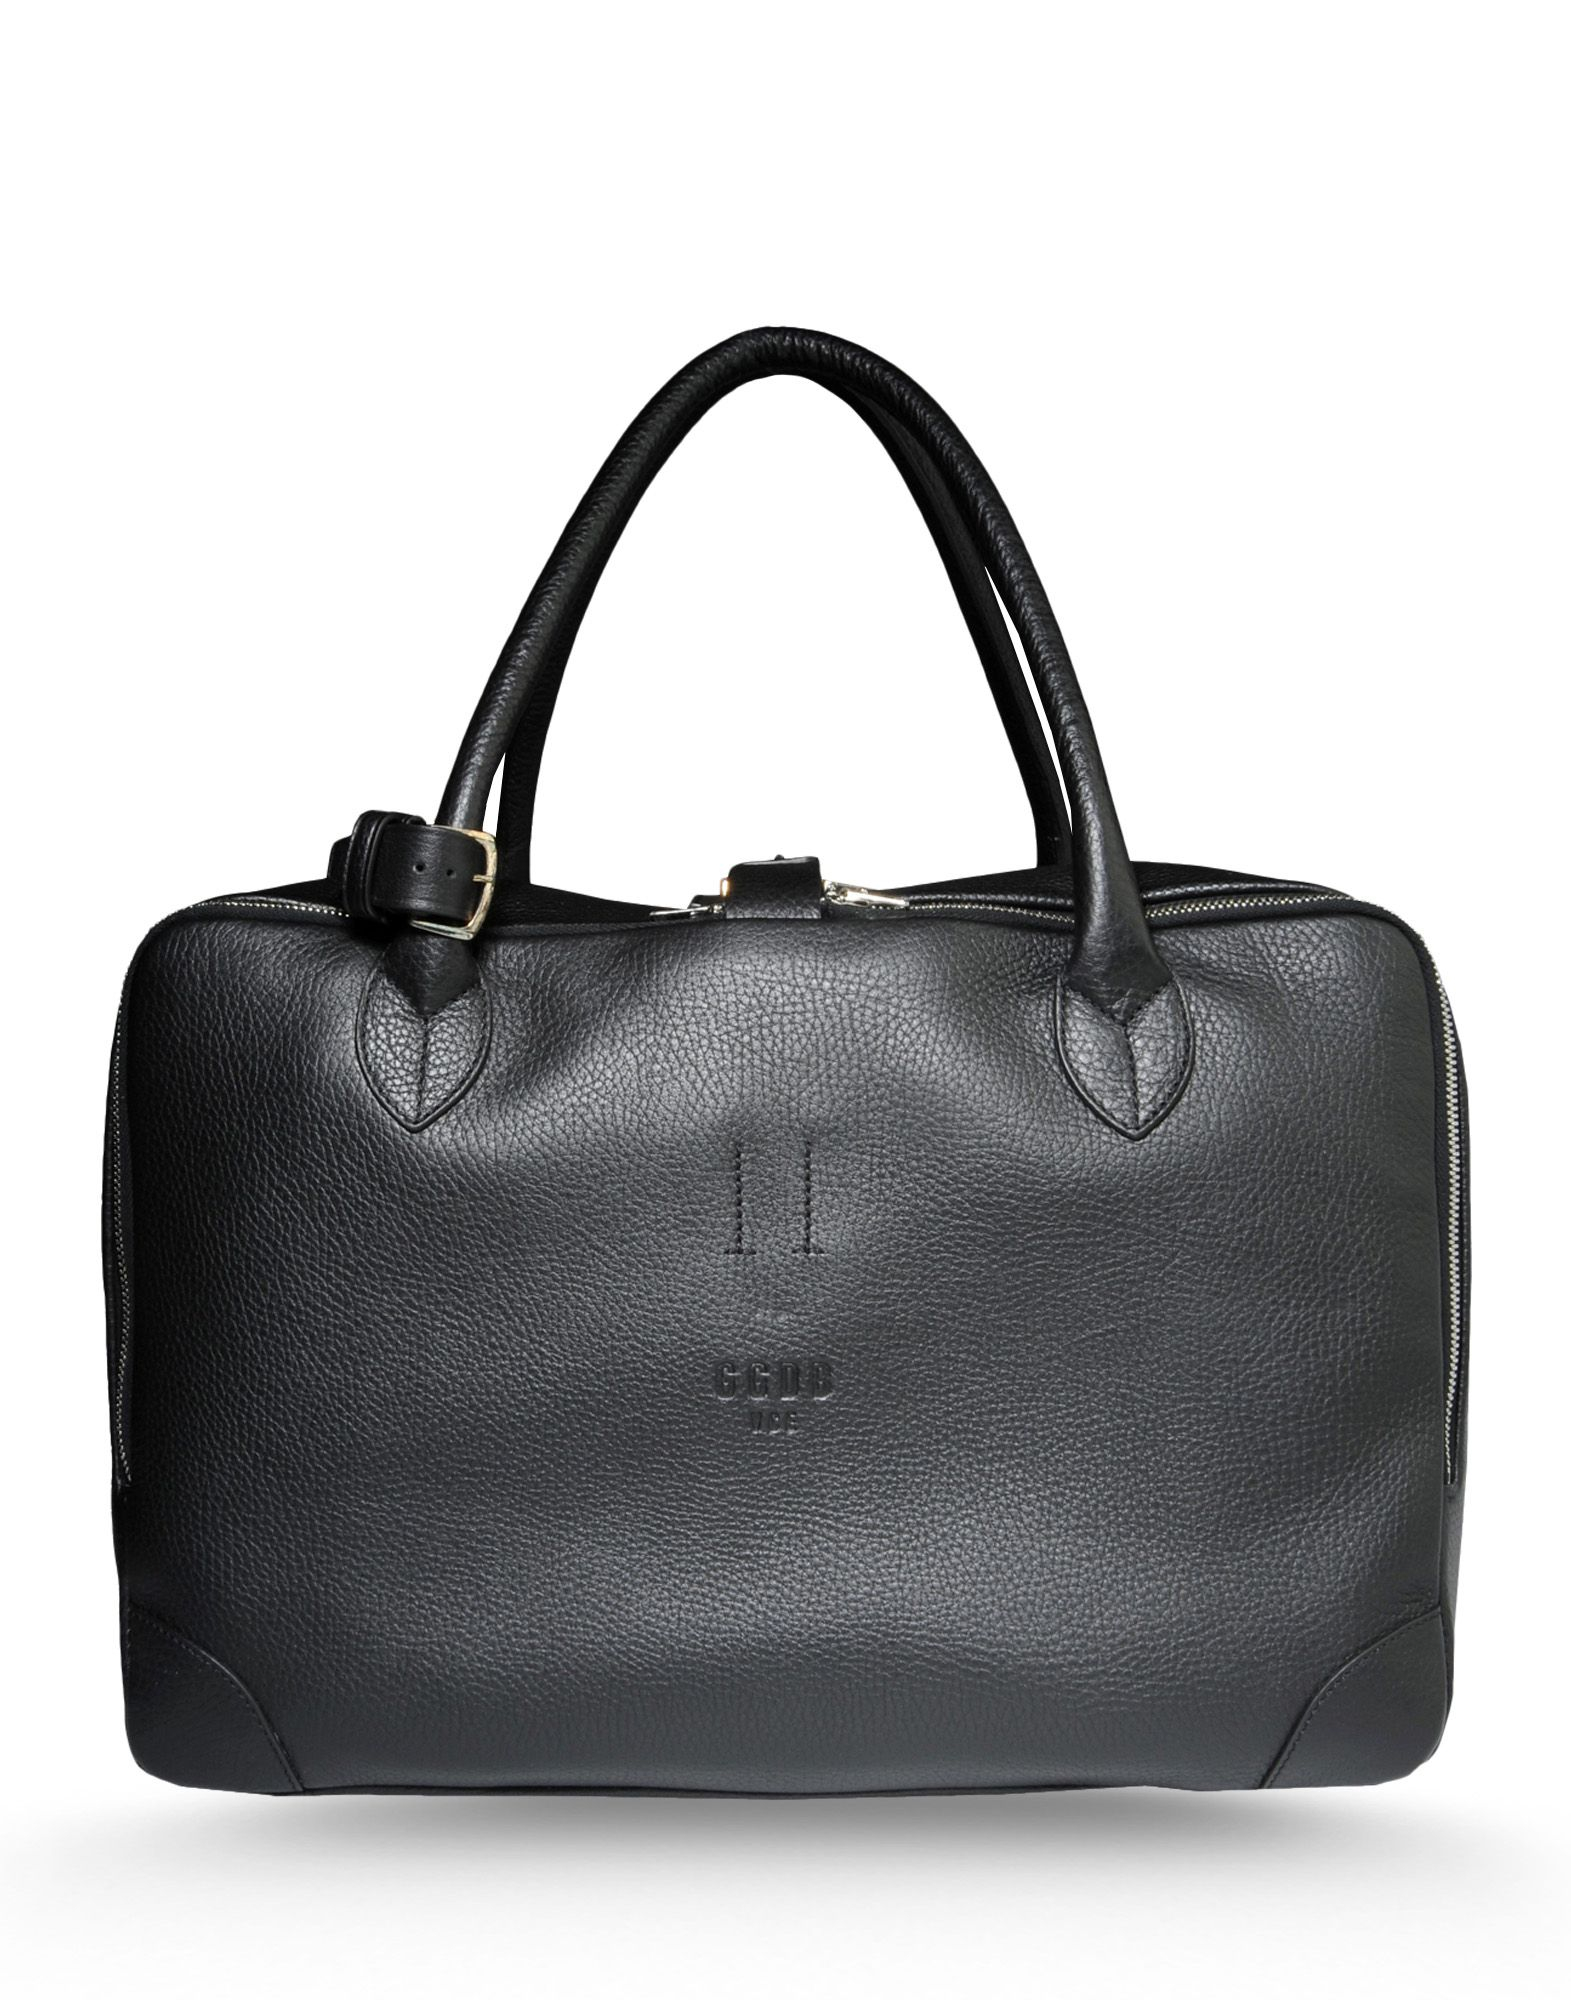 Golden Goose Deluxe Brand Large Leather Bag in Black | Lyst